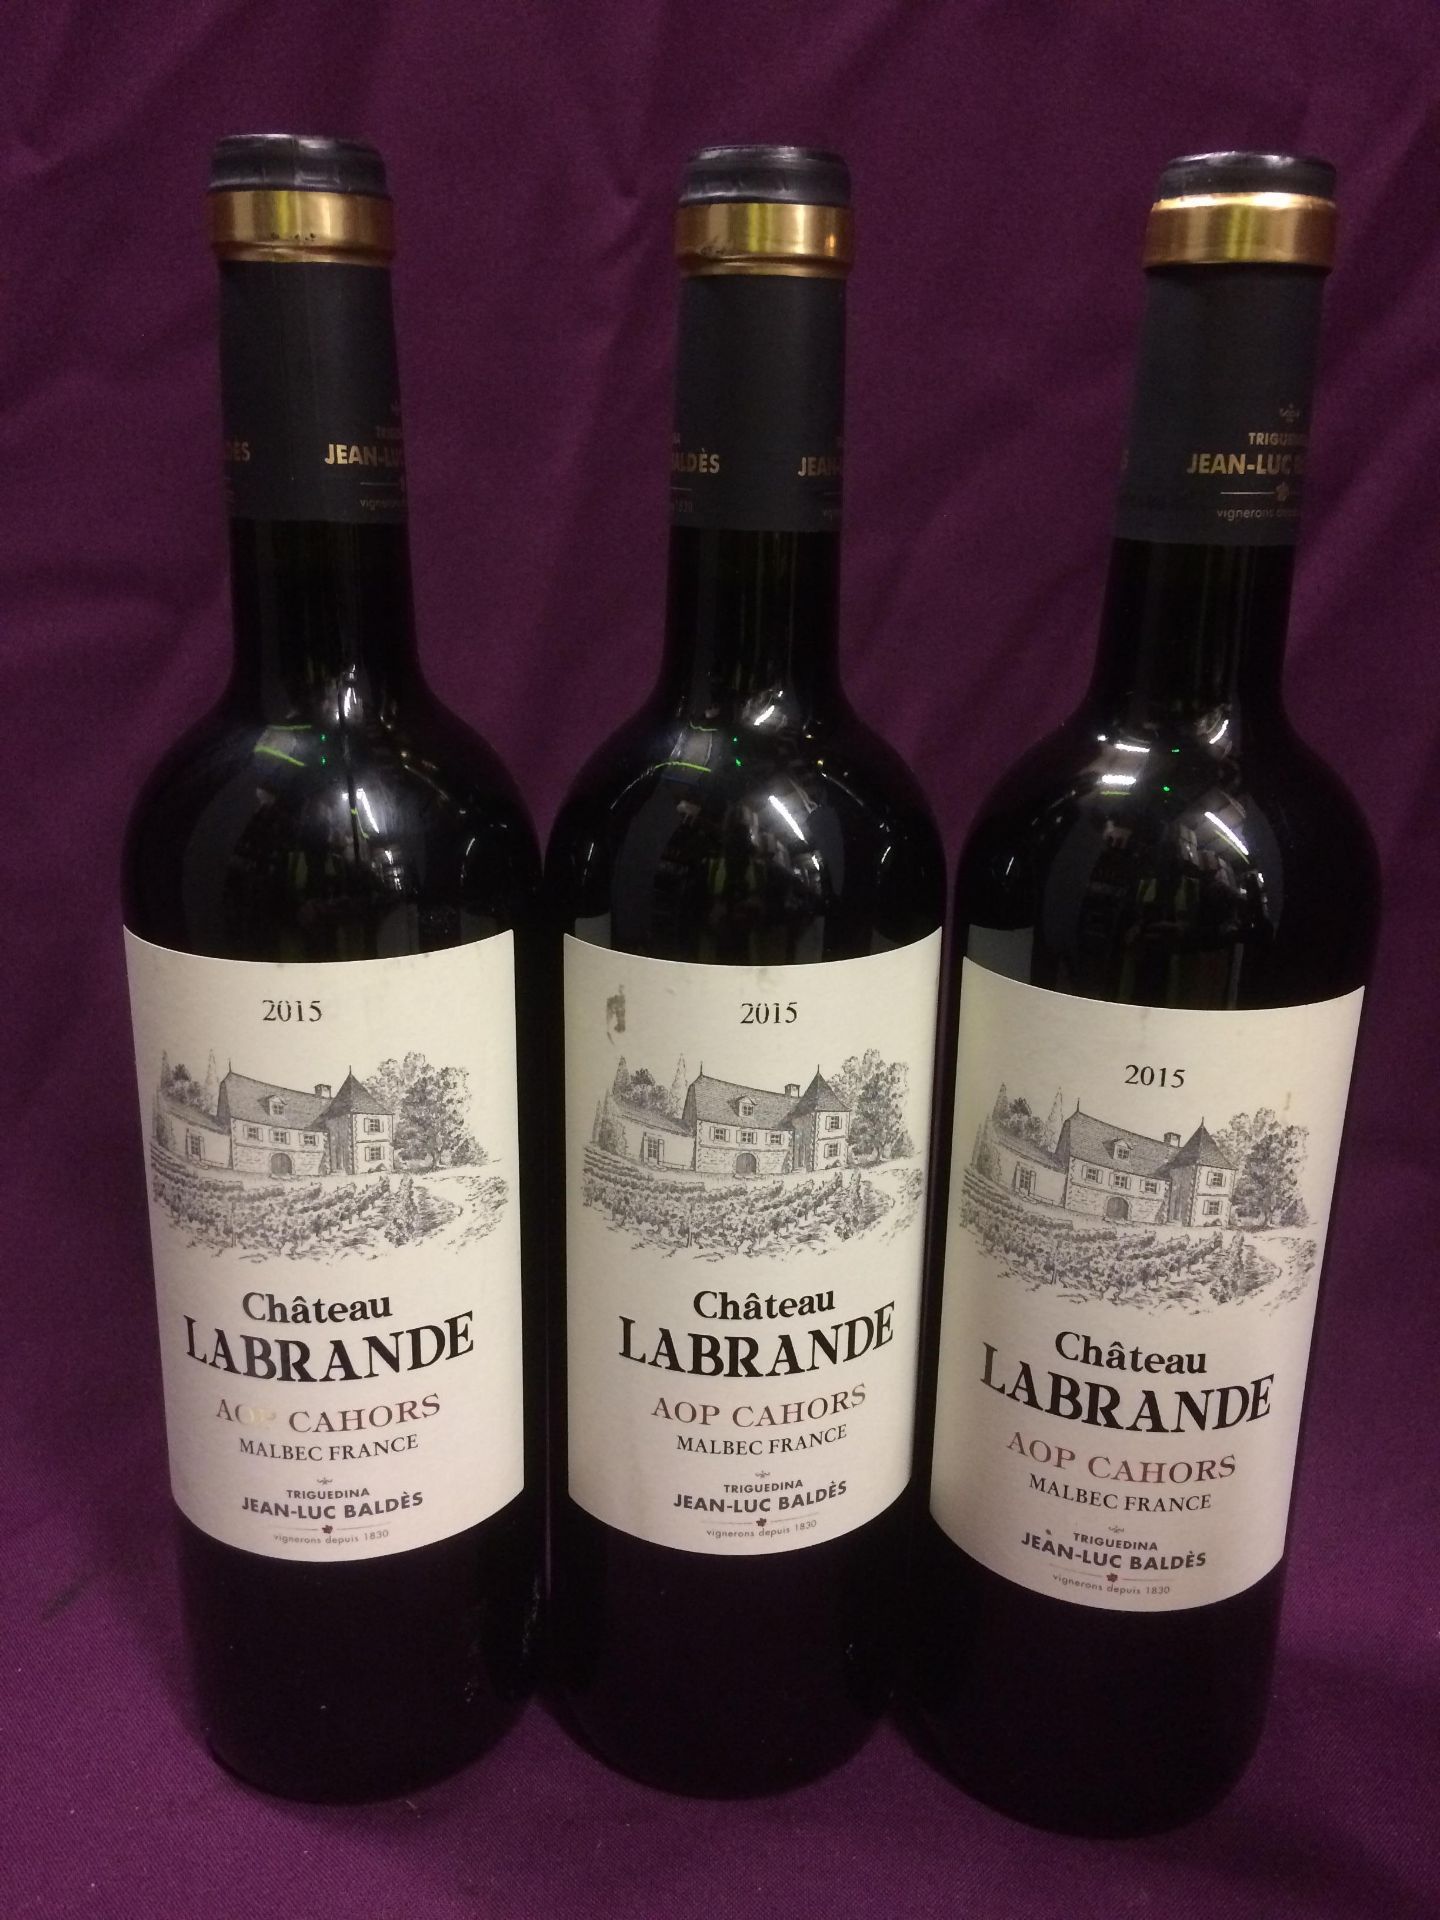 3 x 75cl bottles of Chateau Labronde AOP Cahors Malbec France 2015